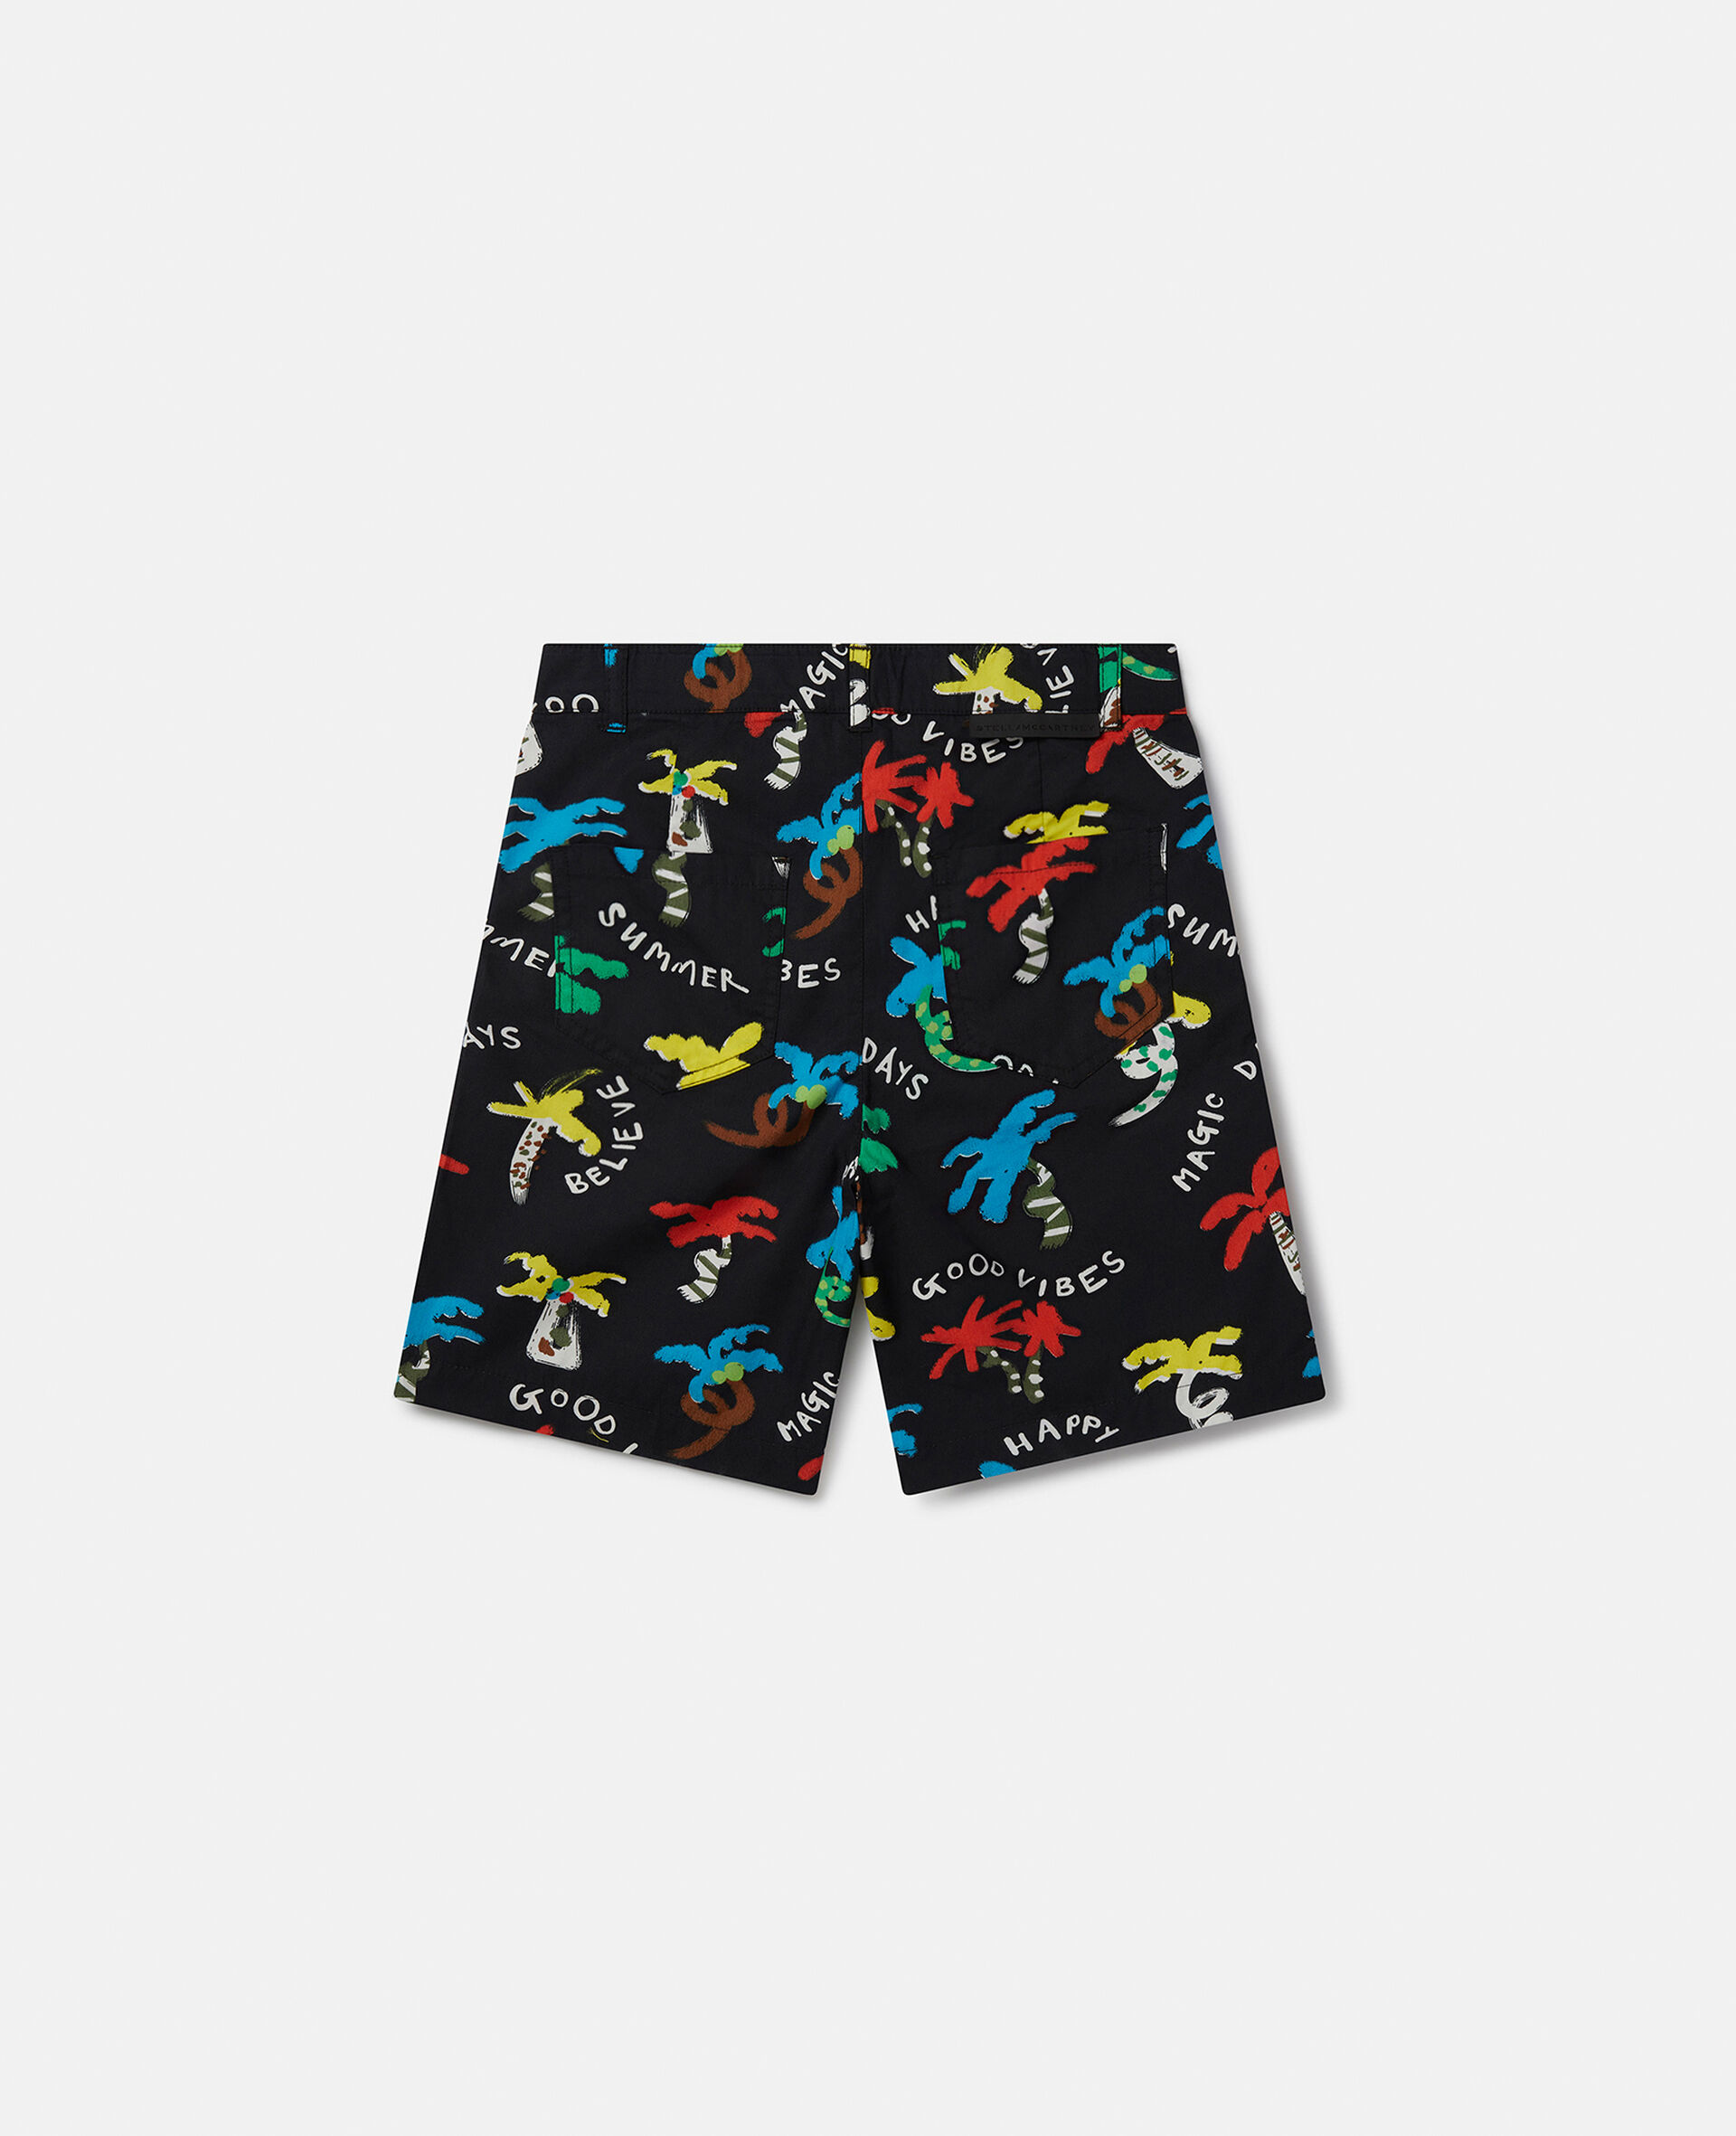 Good Vibes Palm Print Shorts-Multicolour-large image number 2